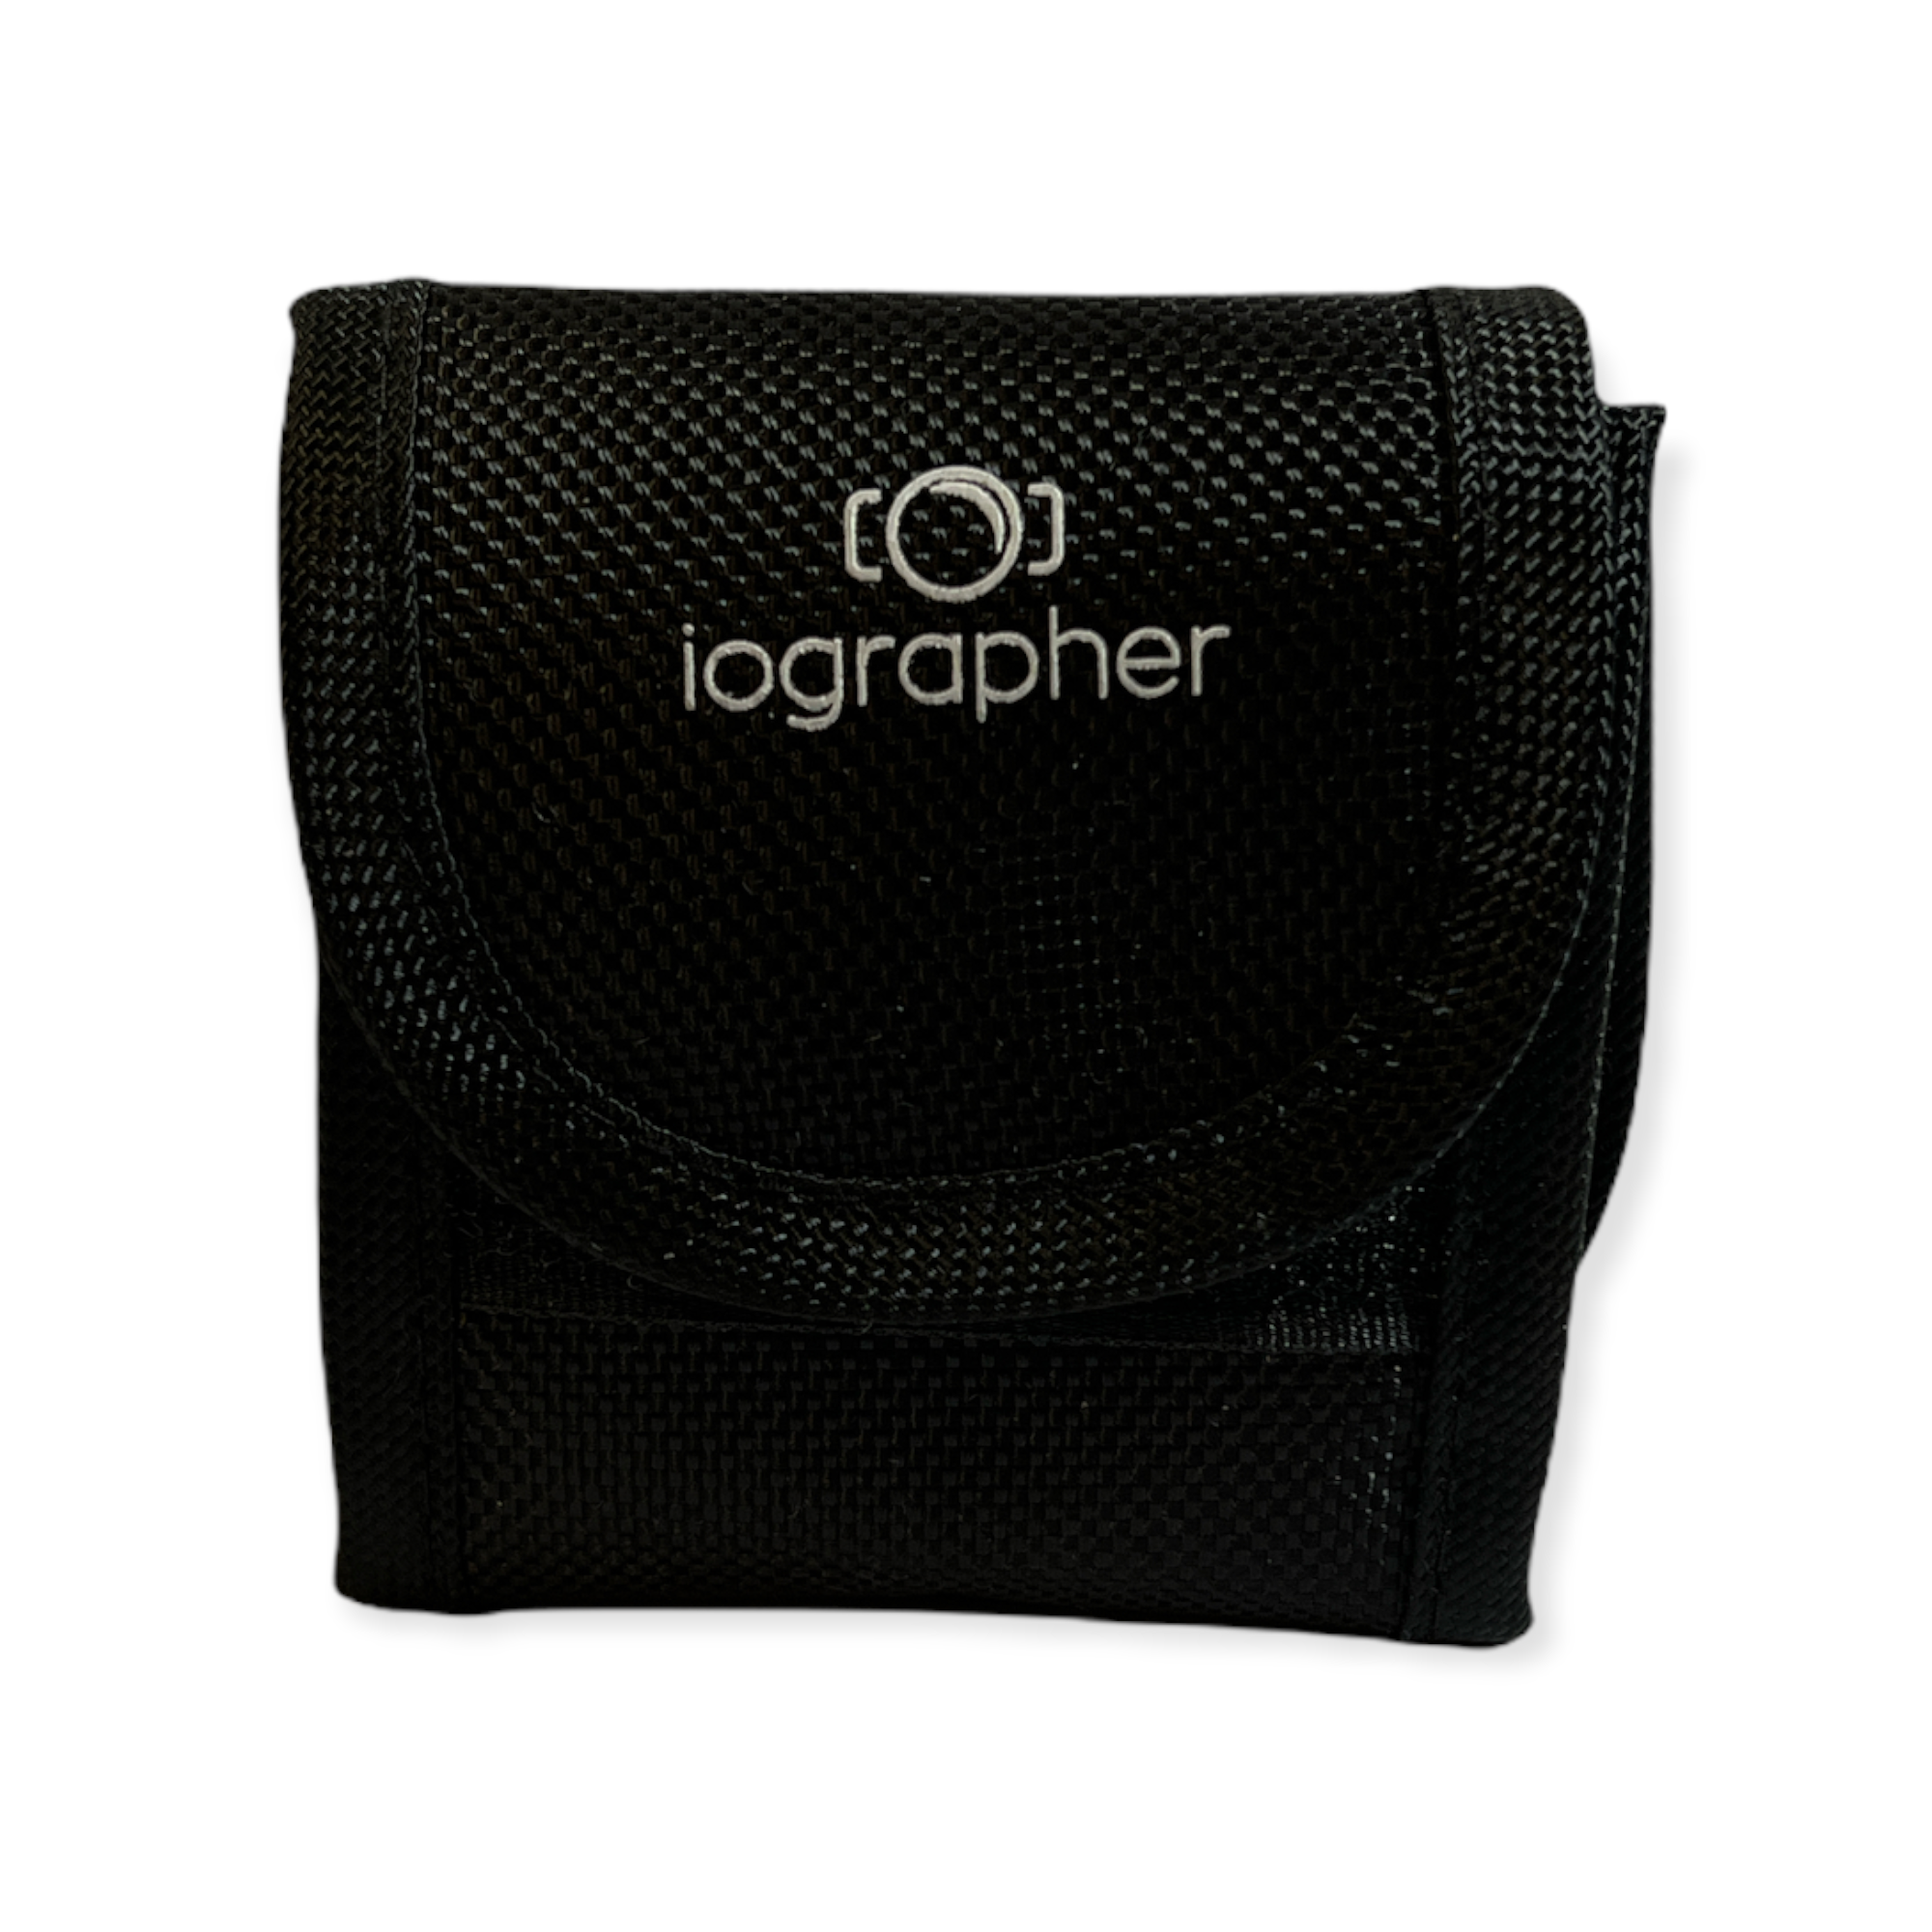 iOgrapher Filter Holder for 41 mm, and Kase square filters for mobile